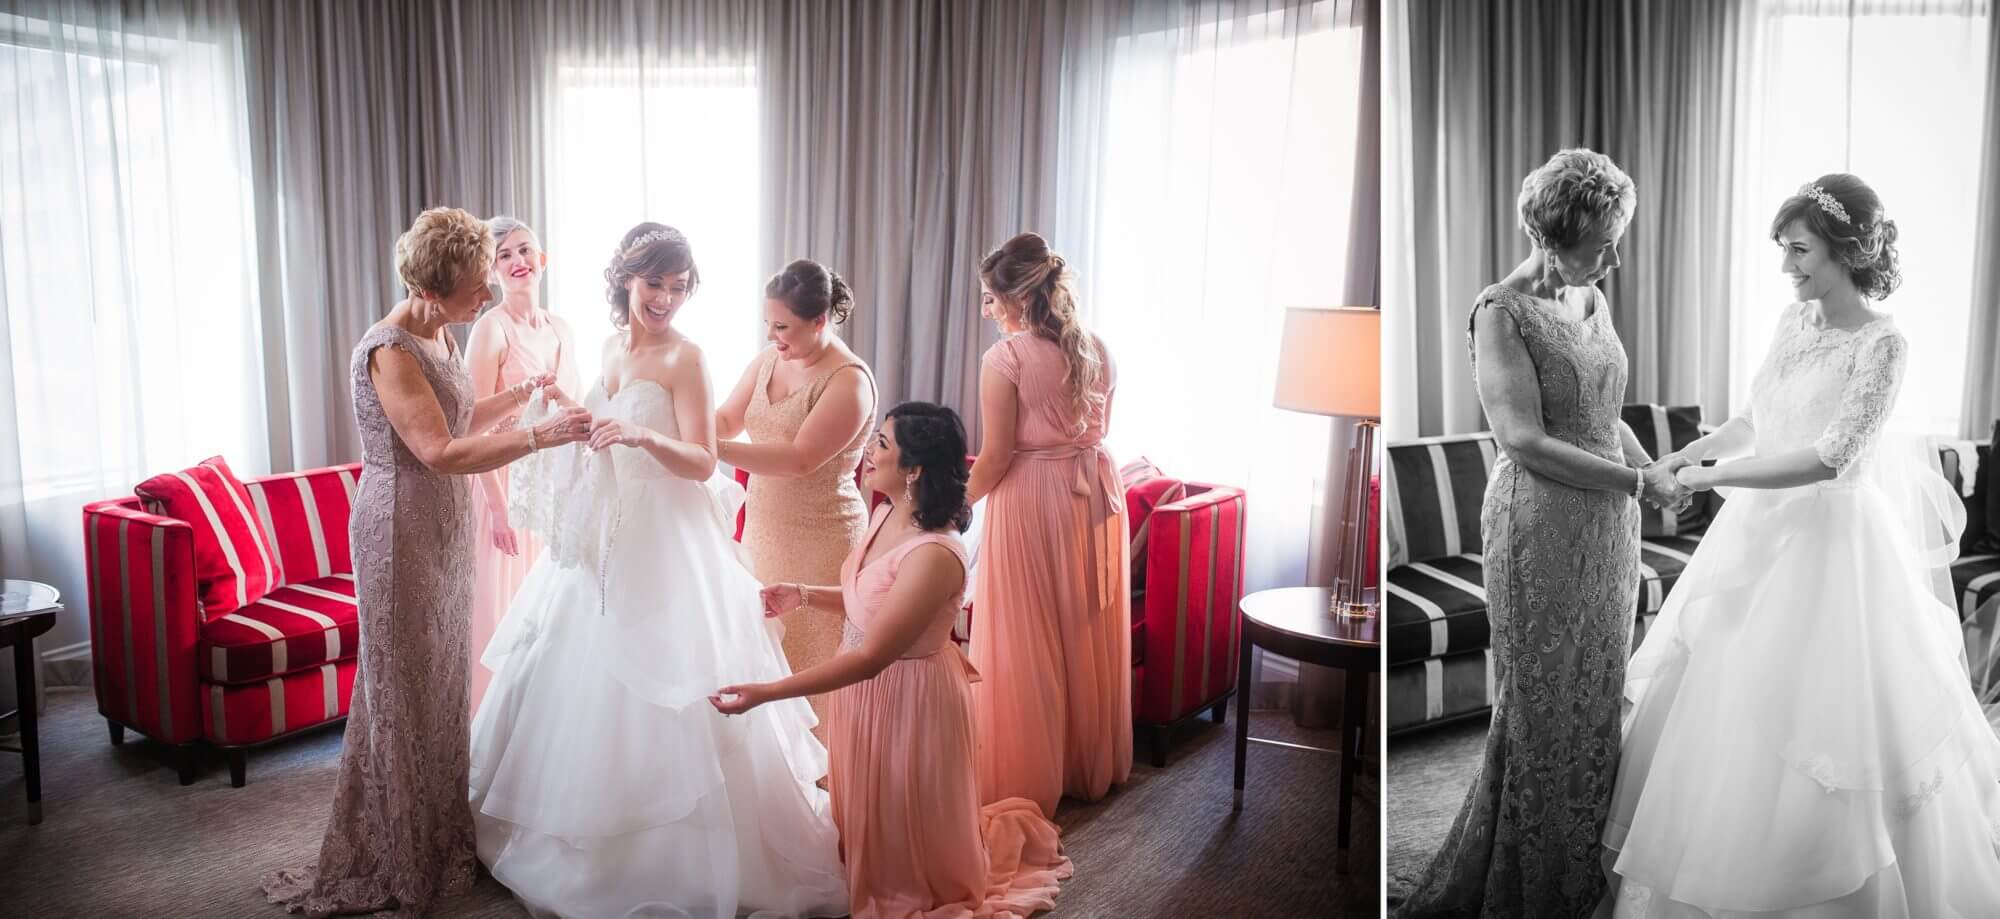 Portrait of the bride's getting on her gown, surrounded by her bridesmaid's at Omni King Edward Hotel, Toronto 